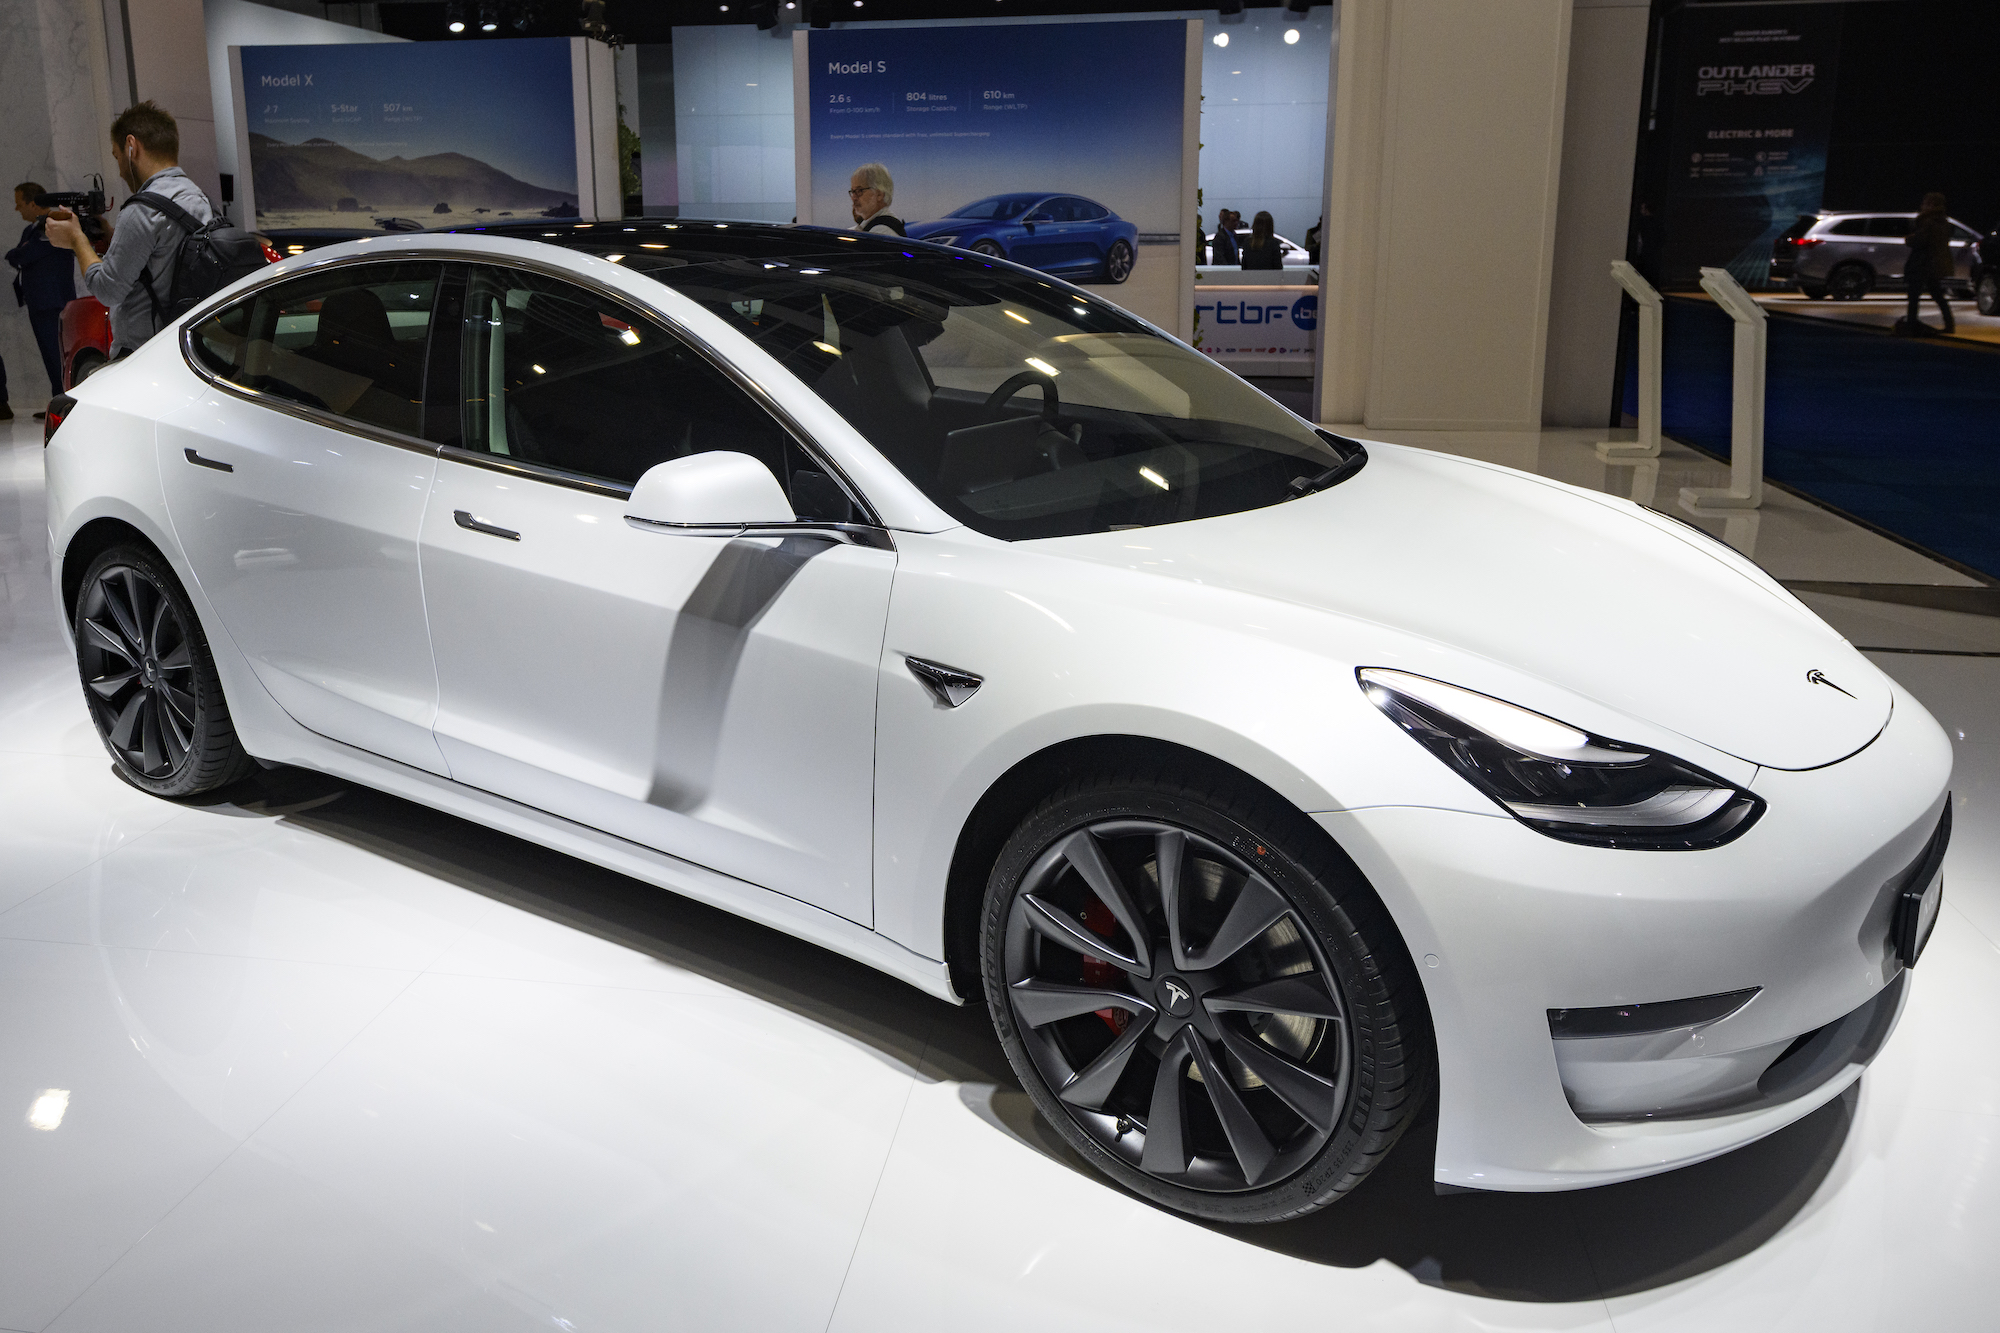 A white Tesla Model 3 compact EV on display at Brussels Expo on January 9, 2020, in Brussels, Belgium